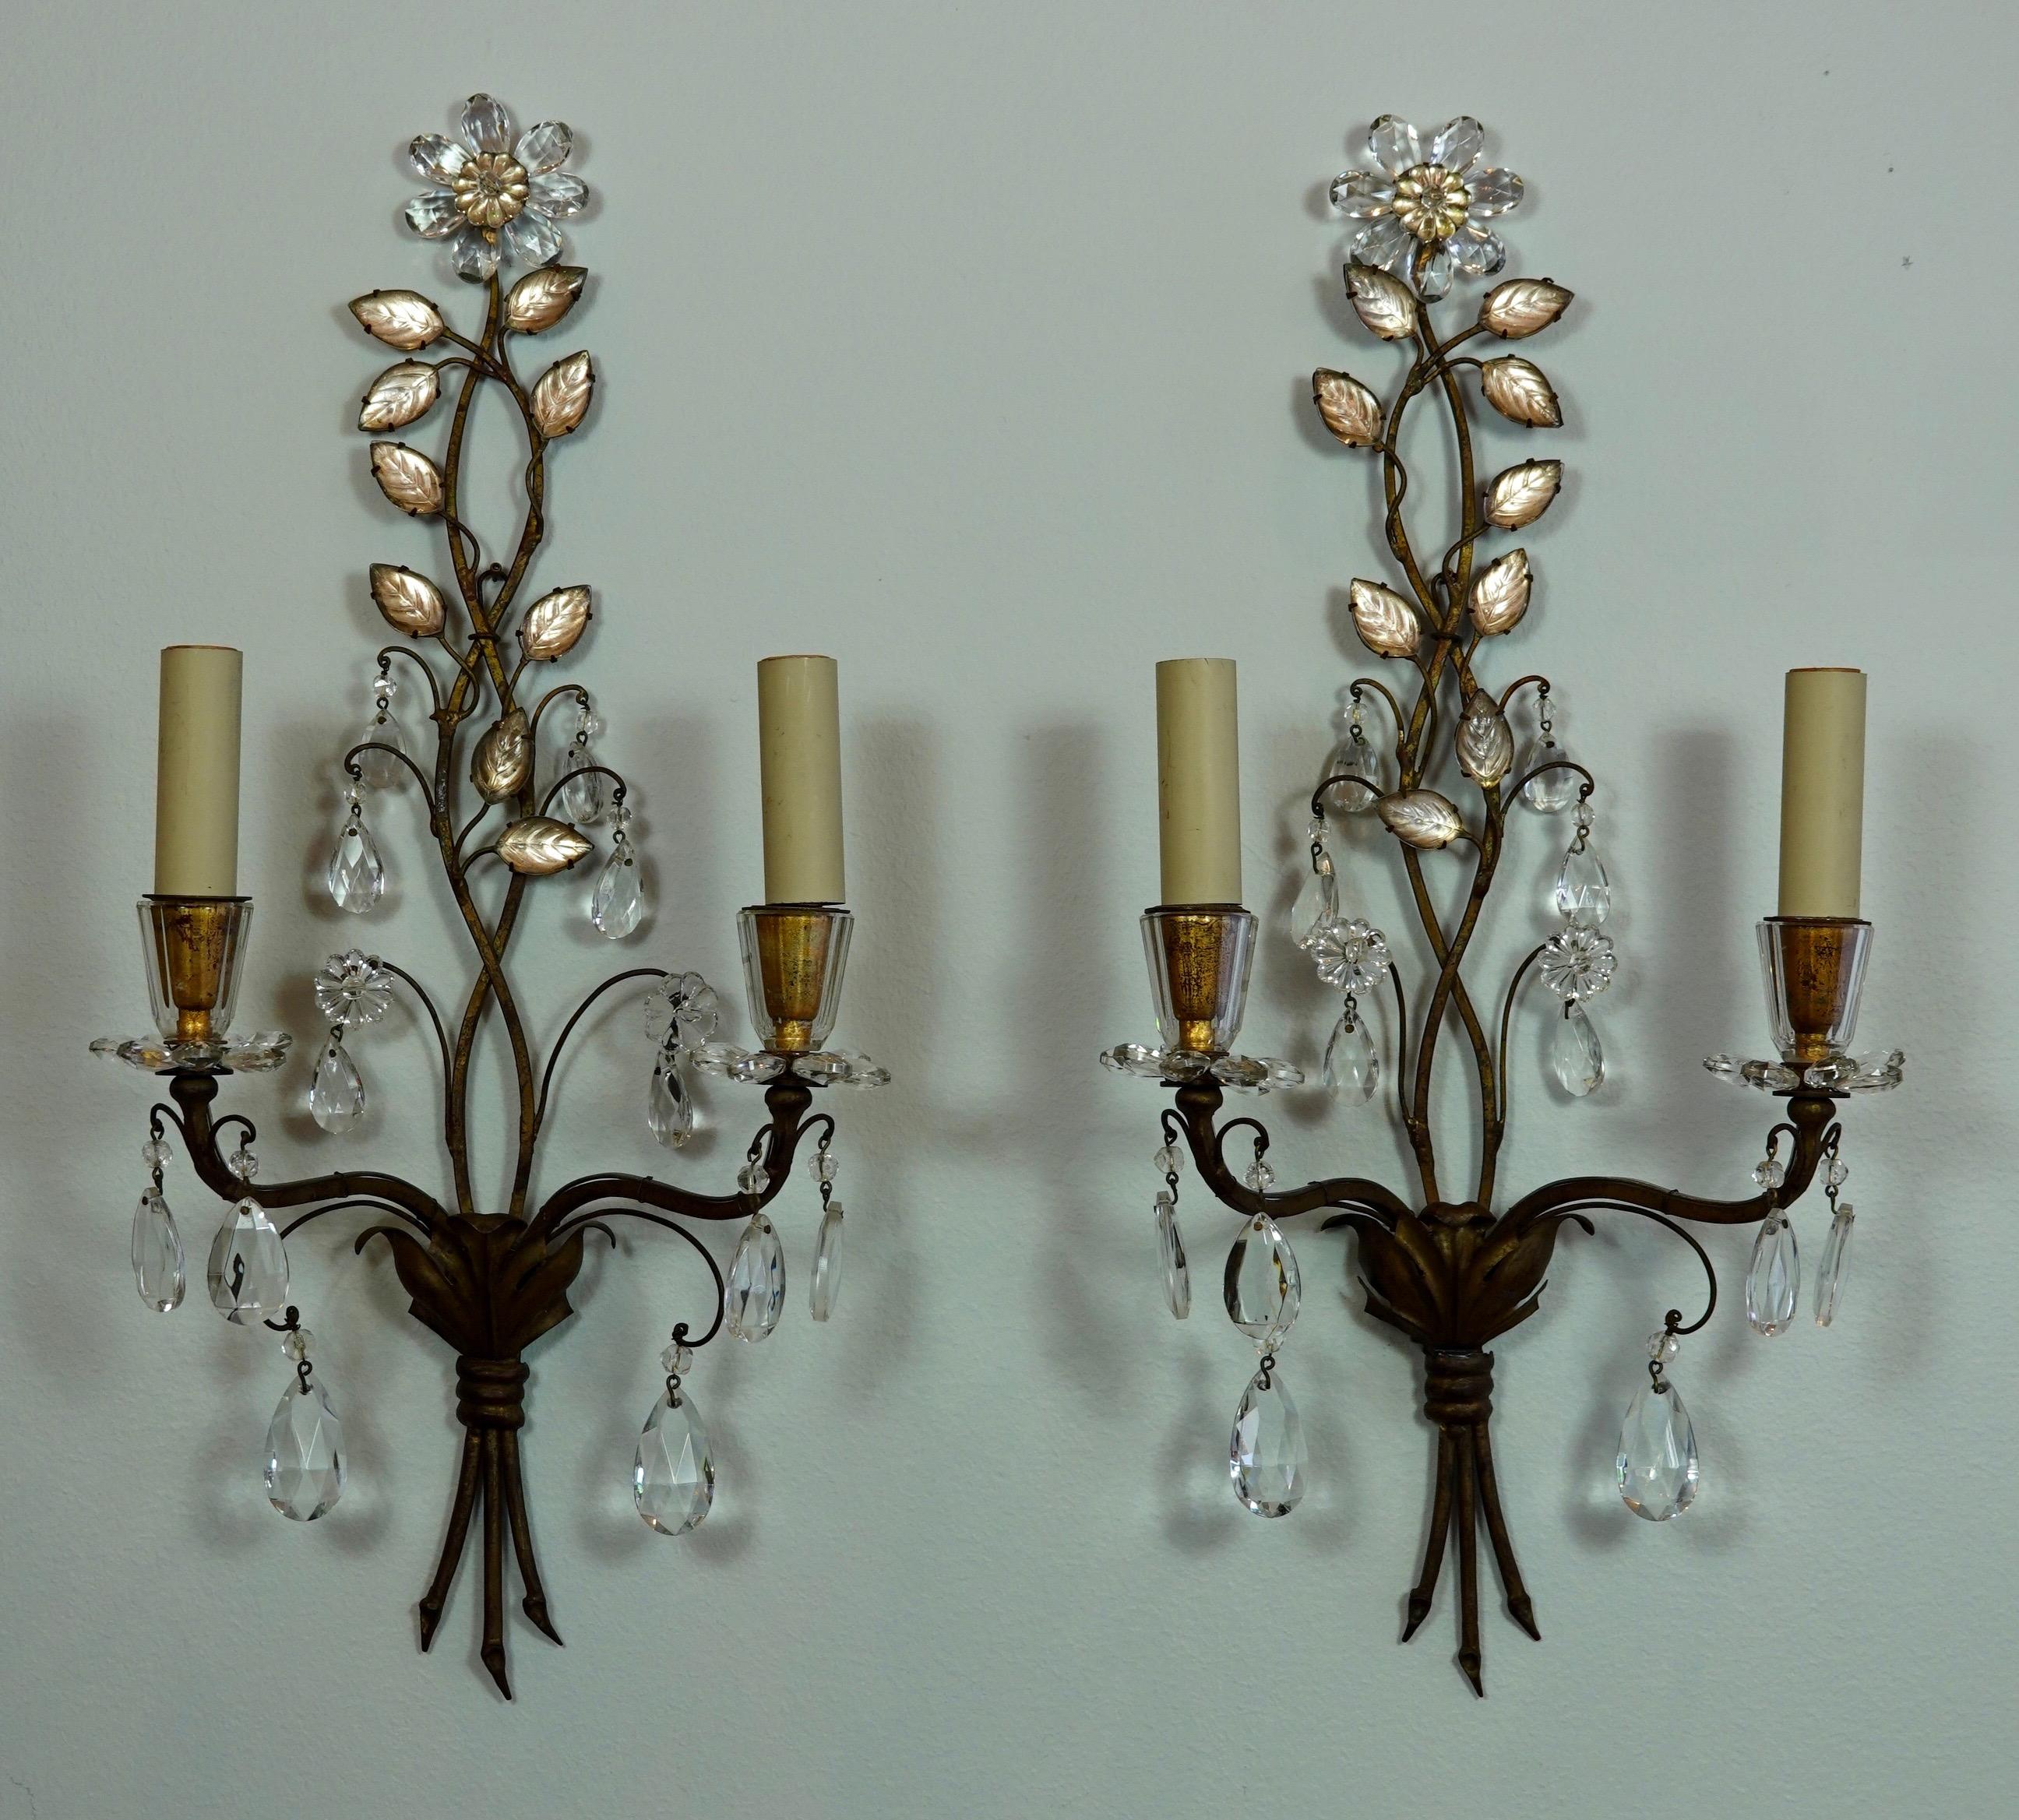 Pair of very elegant French gilded metal and tole sconces with glass leaves and drops by Maison Baguès (midcentury). The bobesches are hand-strung crystals in the form of flowers. The pair of sconces have two lights each and have been rewired for